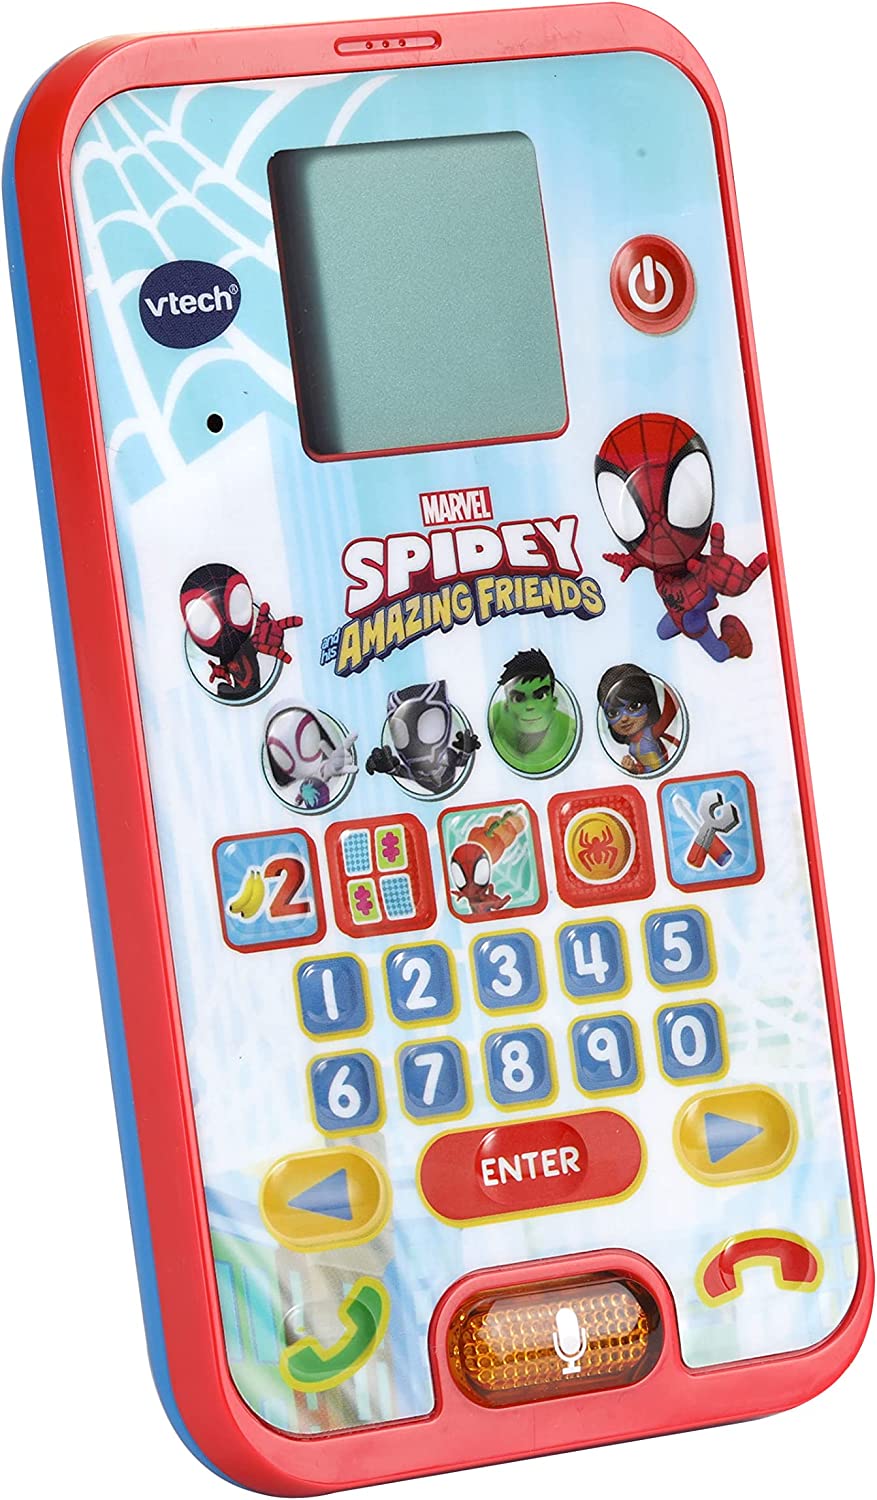 VTech Spidey and his amazing Friend Learning Phone